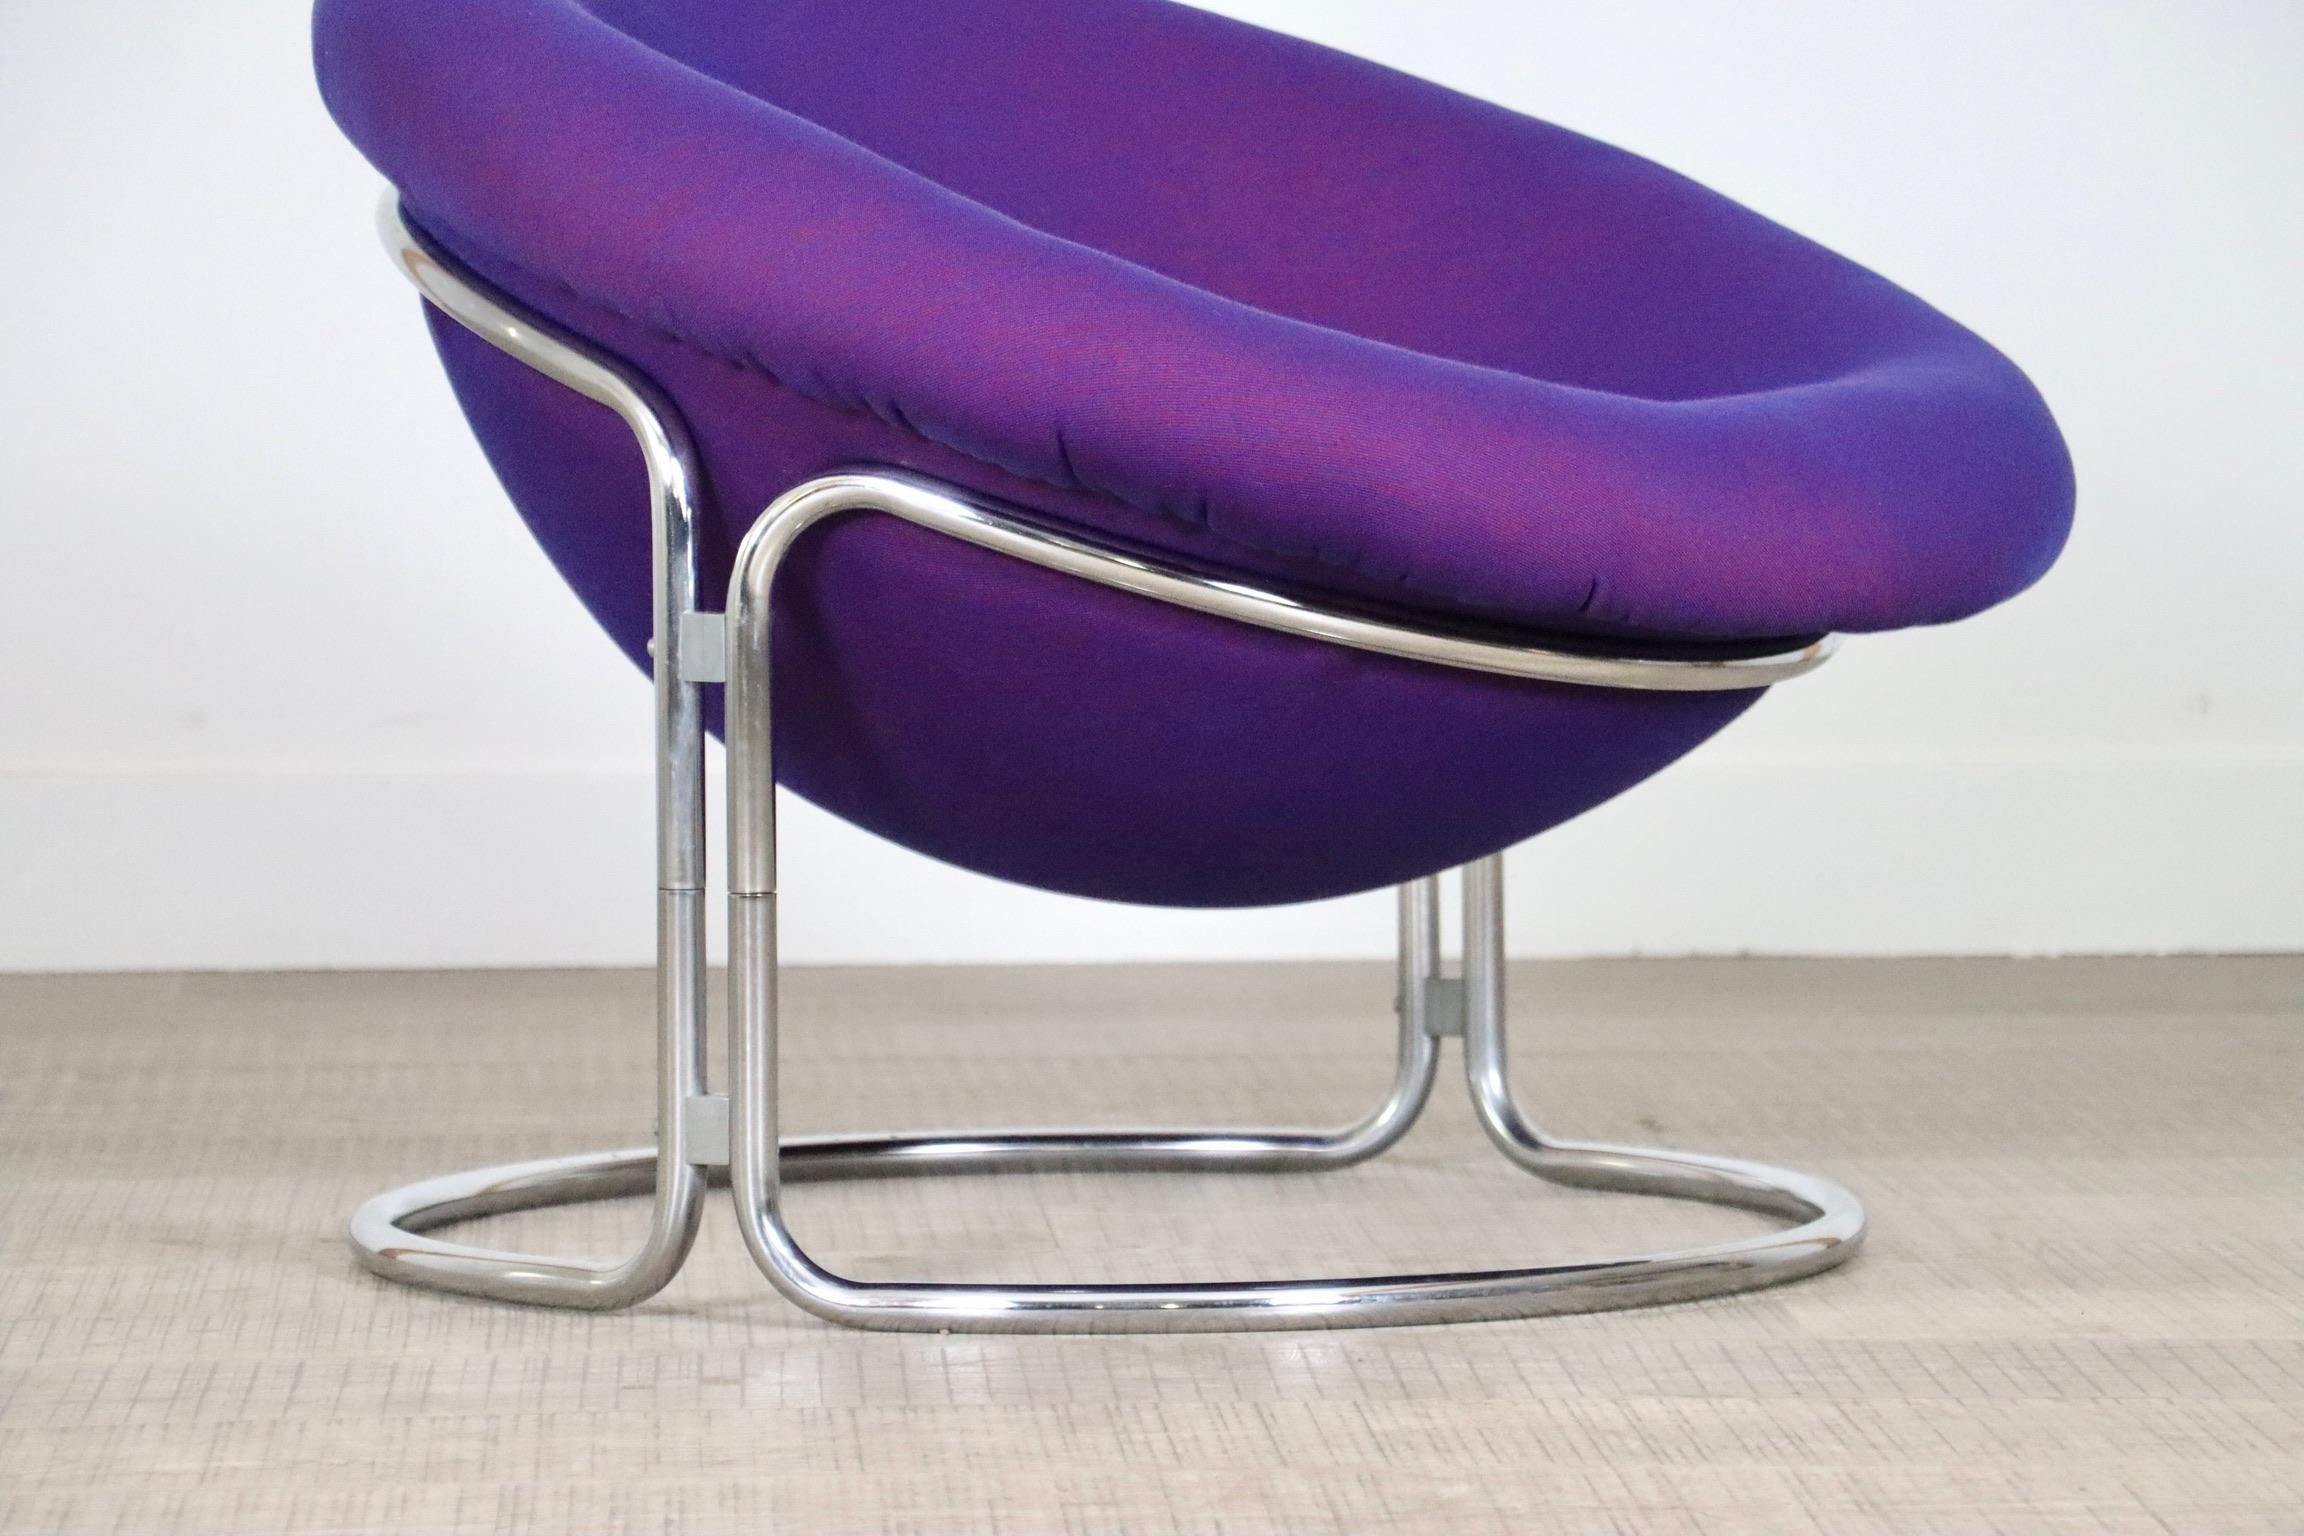 Luigi Colani Lounge Chair For Kusch & Co Germany 1968 For Sale 4